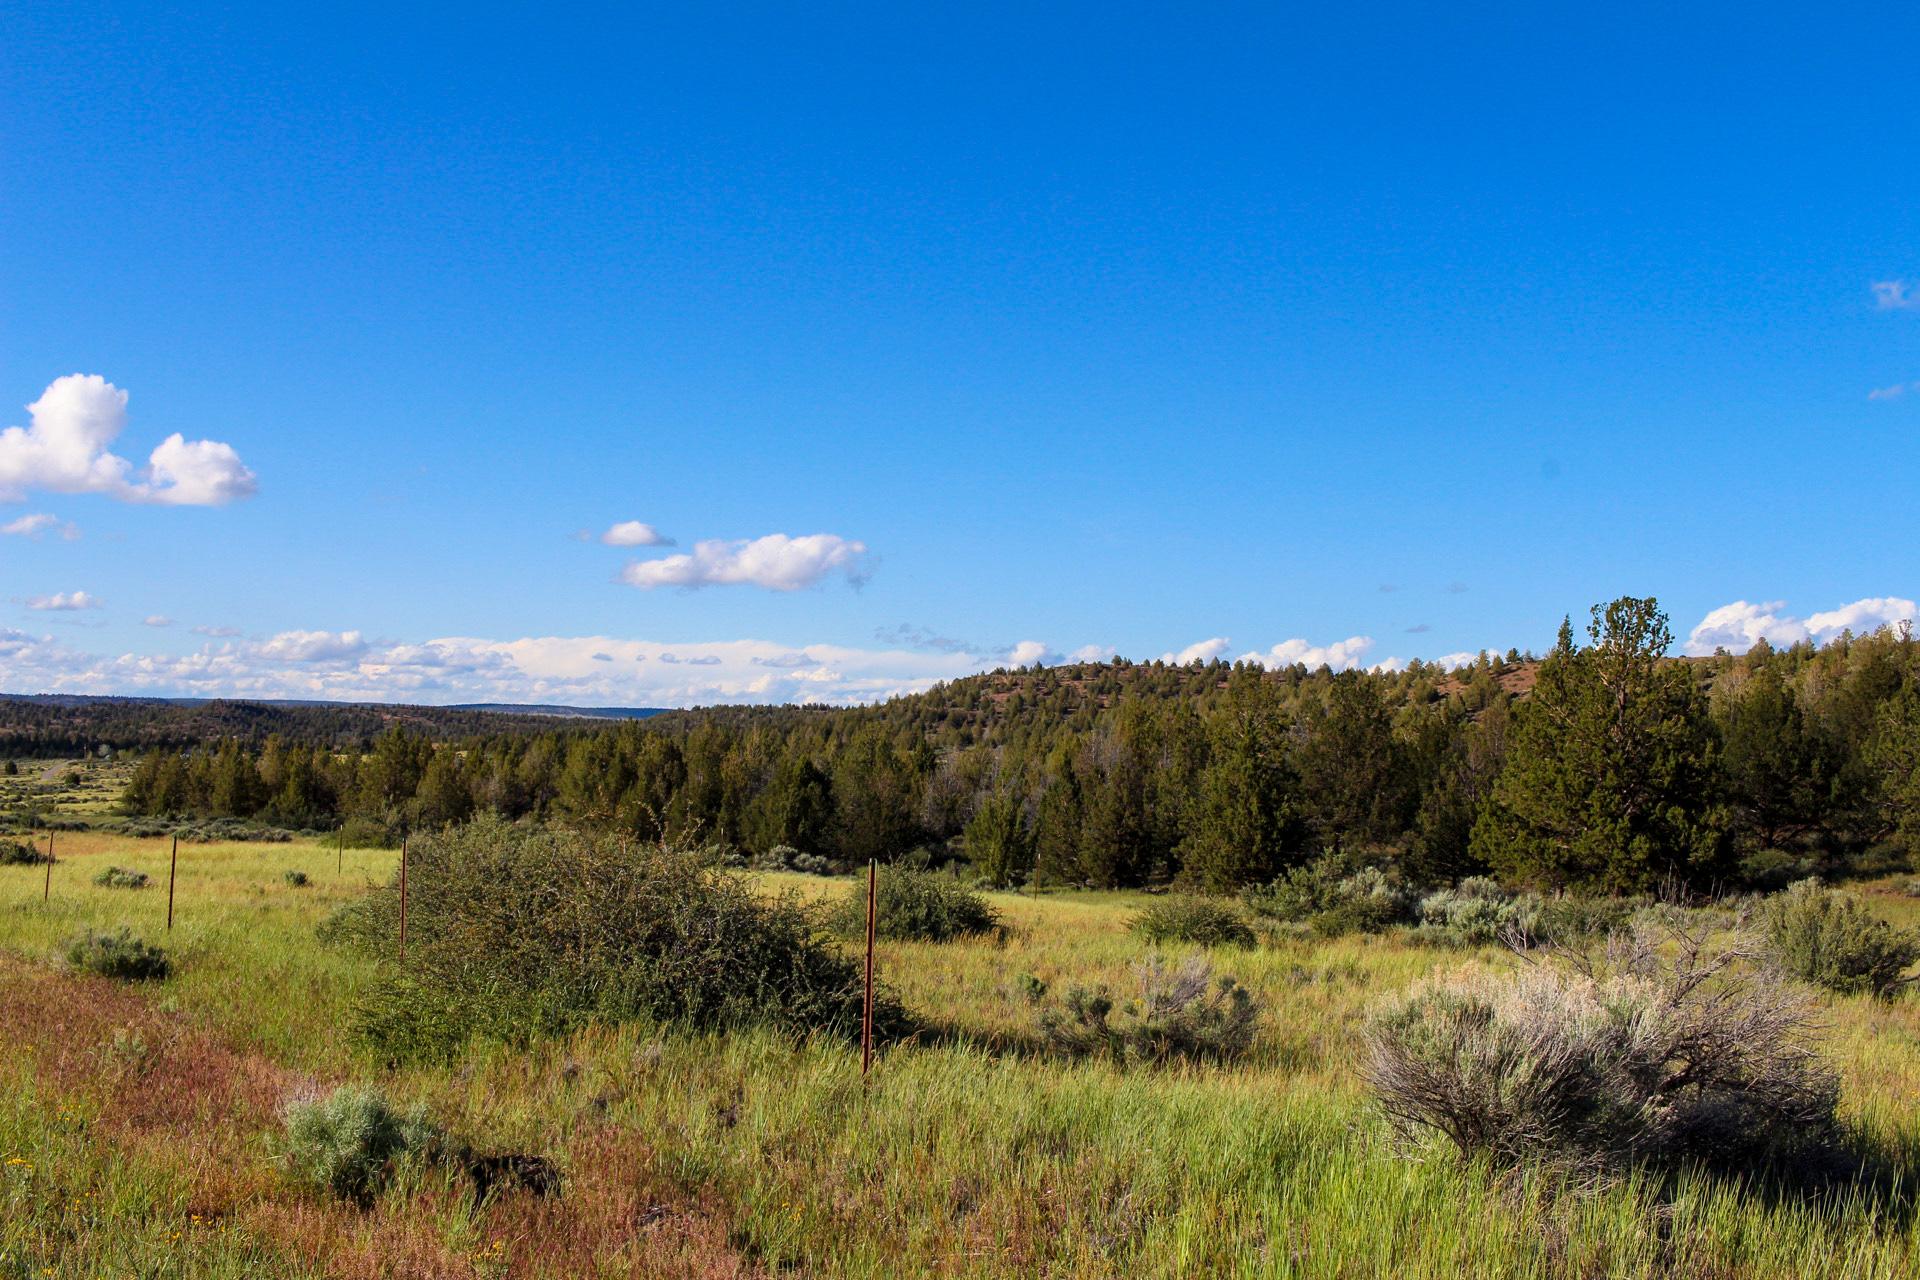 Escape the City on Nearly an Acre of Majestic Pines in Beautiful Modoc County, California!